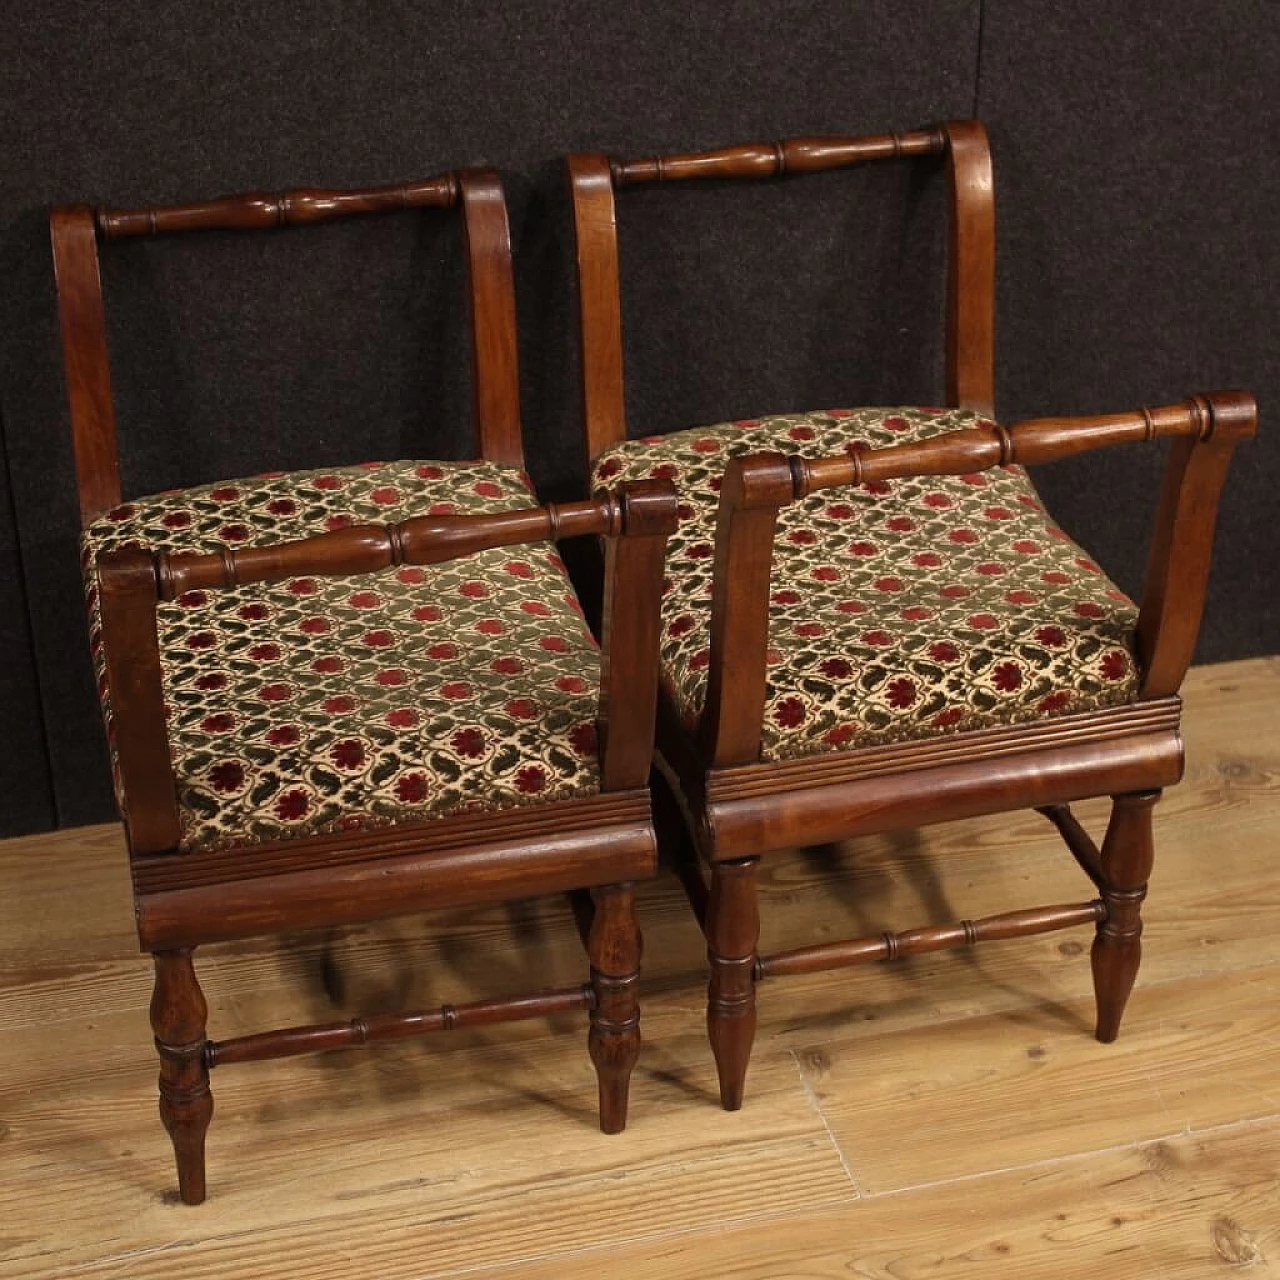 Pair of Charles X benches in carved walnut and floral fabric, 19th century 1116102